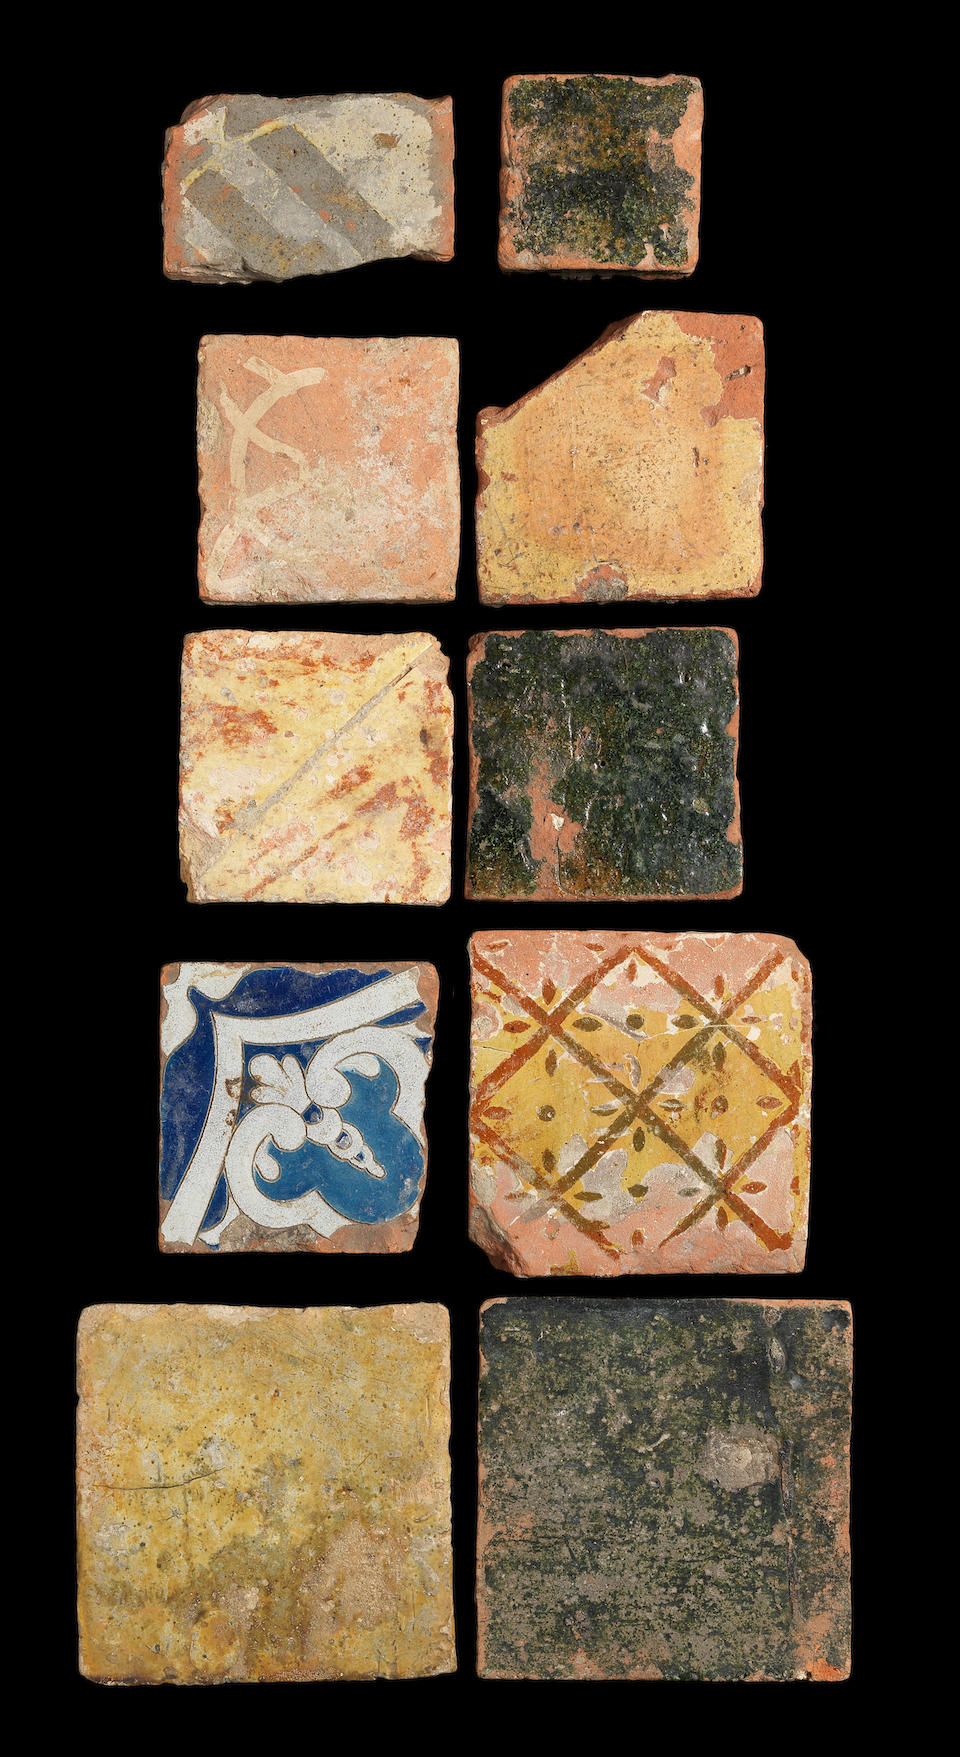 A study collection of Medieval tiles, 13th-16th century